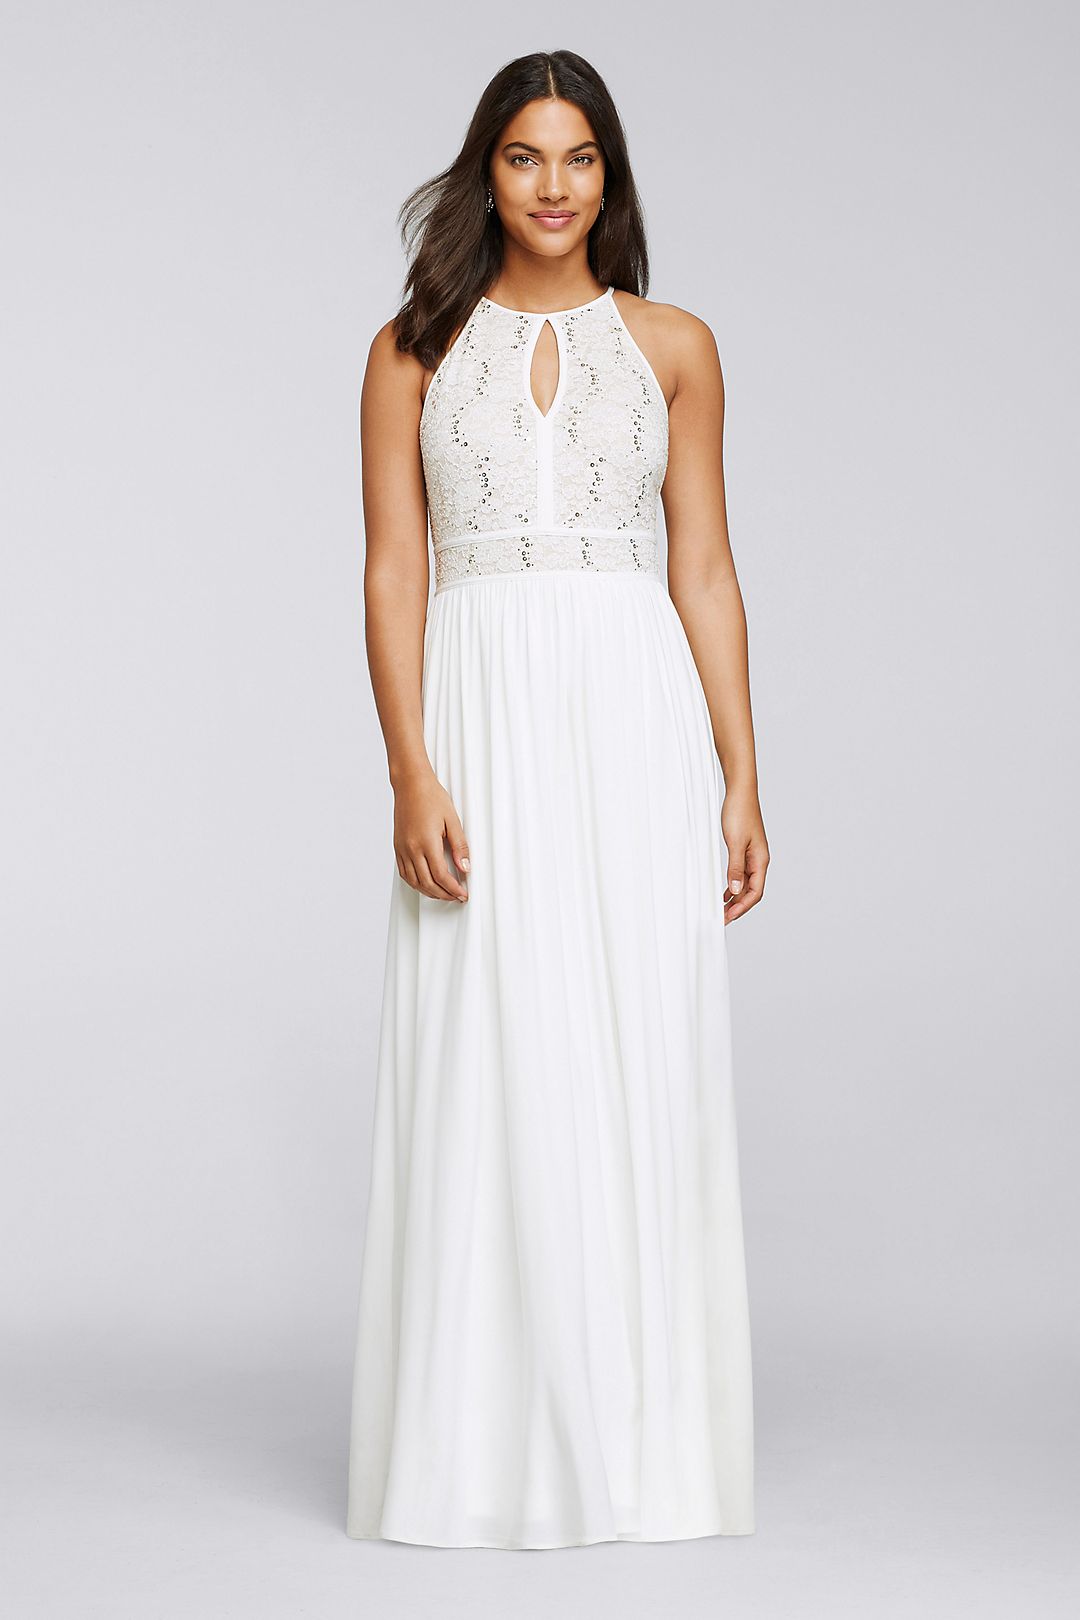 Long Halter Dress with Glitter Lace Bodice Image 1